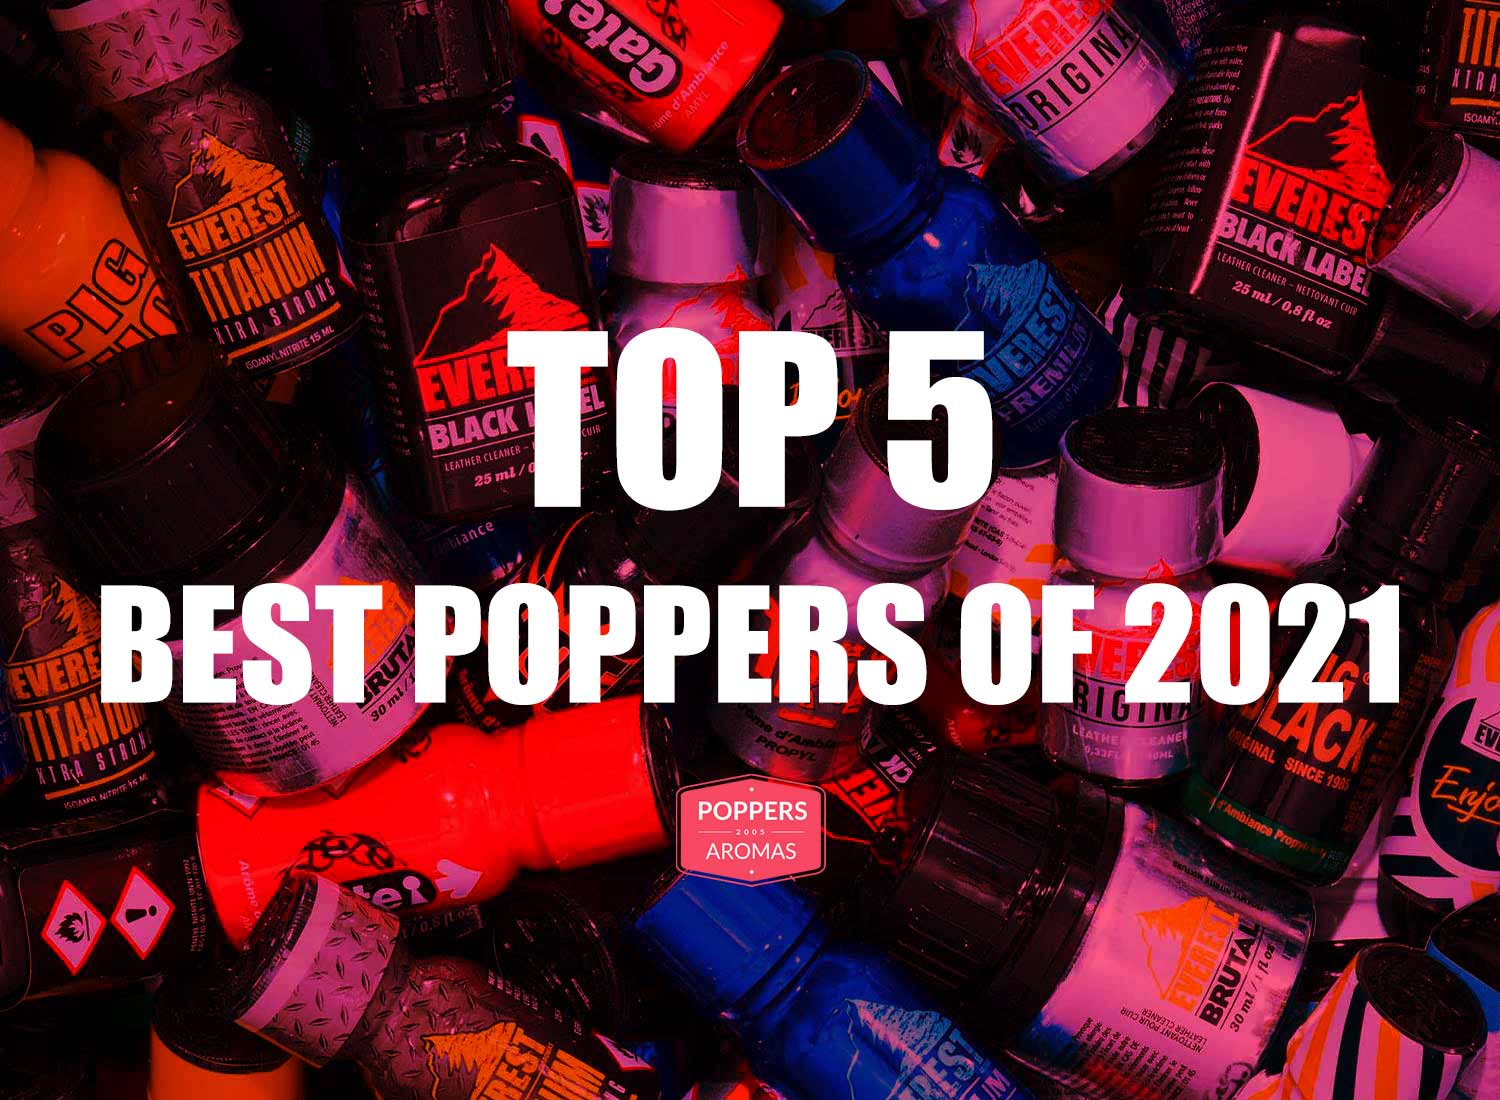 Top 5 Best Poppers of 2021 on Poppers Aromas